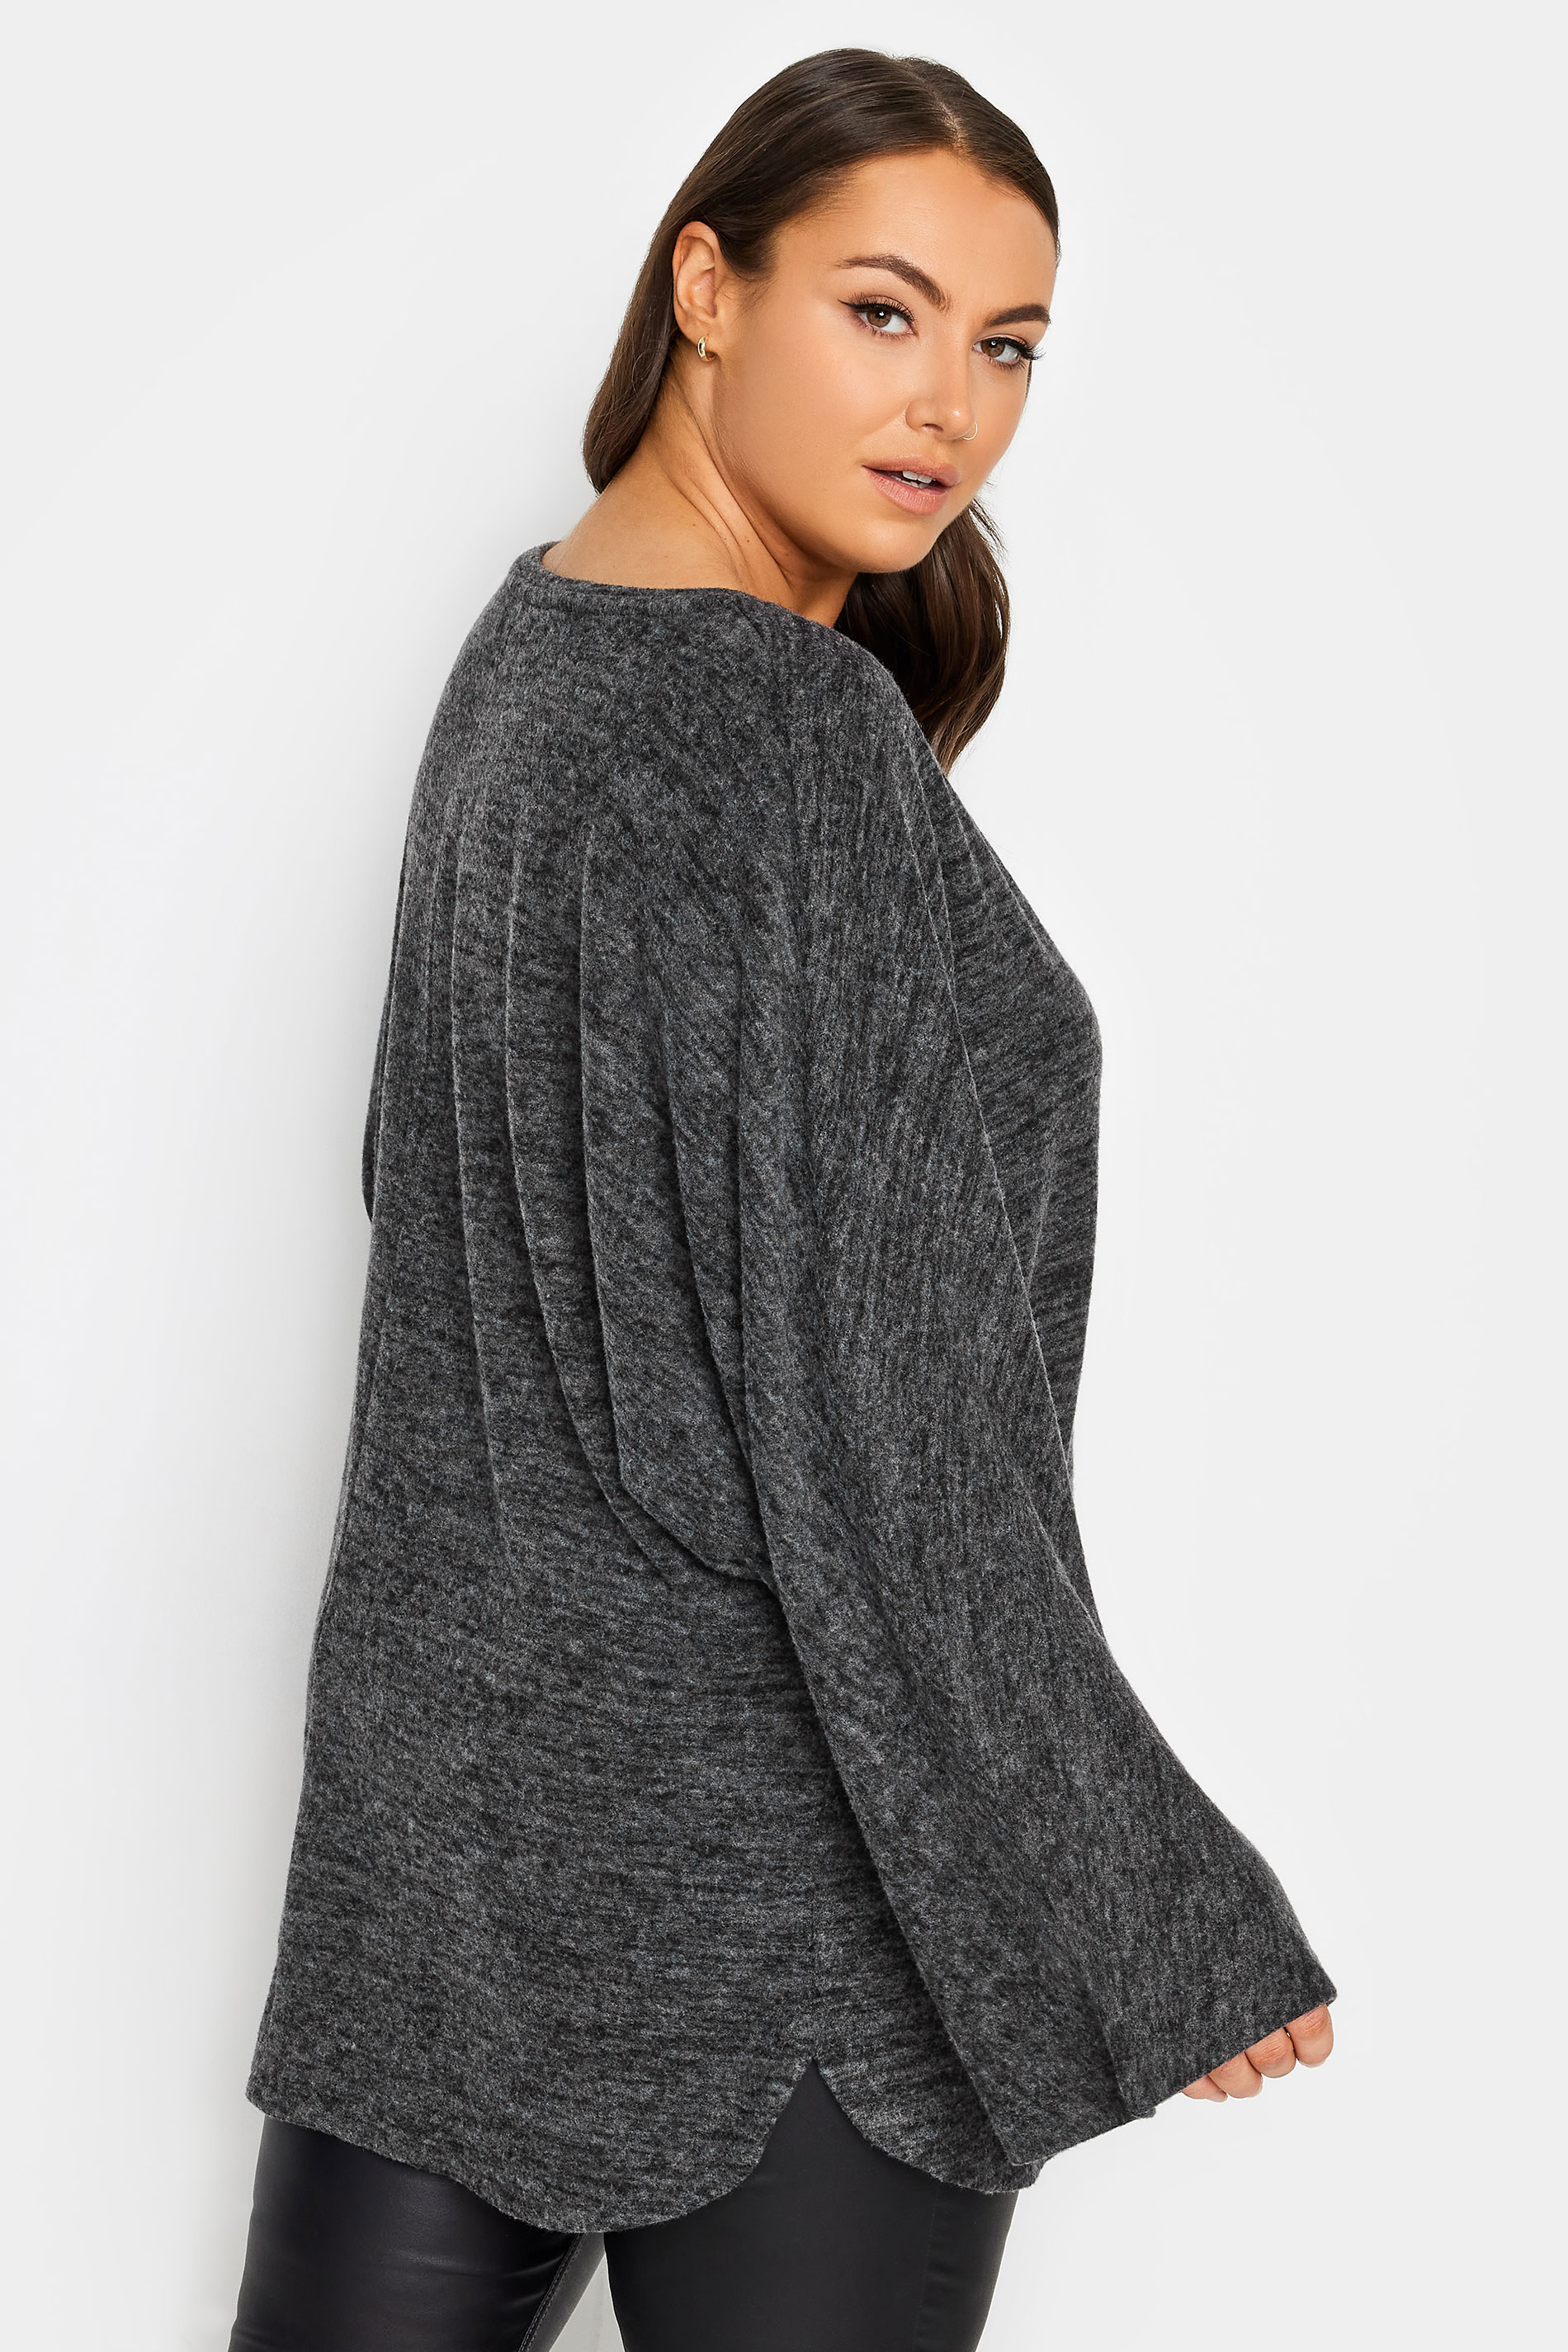 YOURS LUXURY Plus Size Charcoal Grey Batwing Sleeve Jumper | Yours Clothing 3